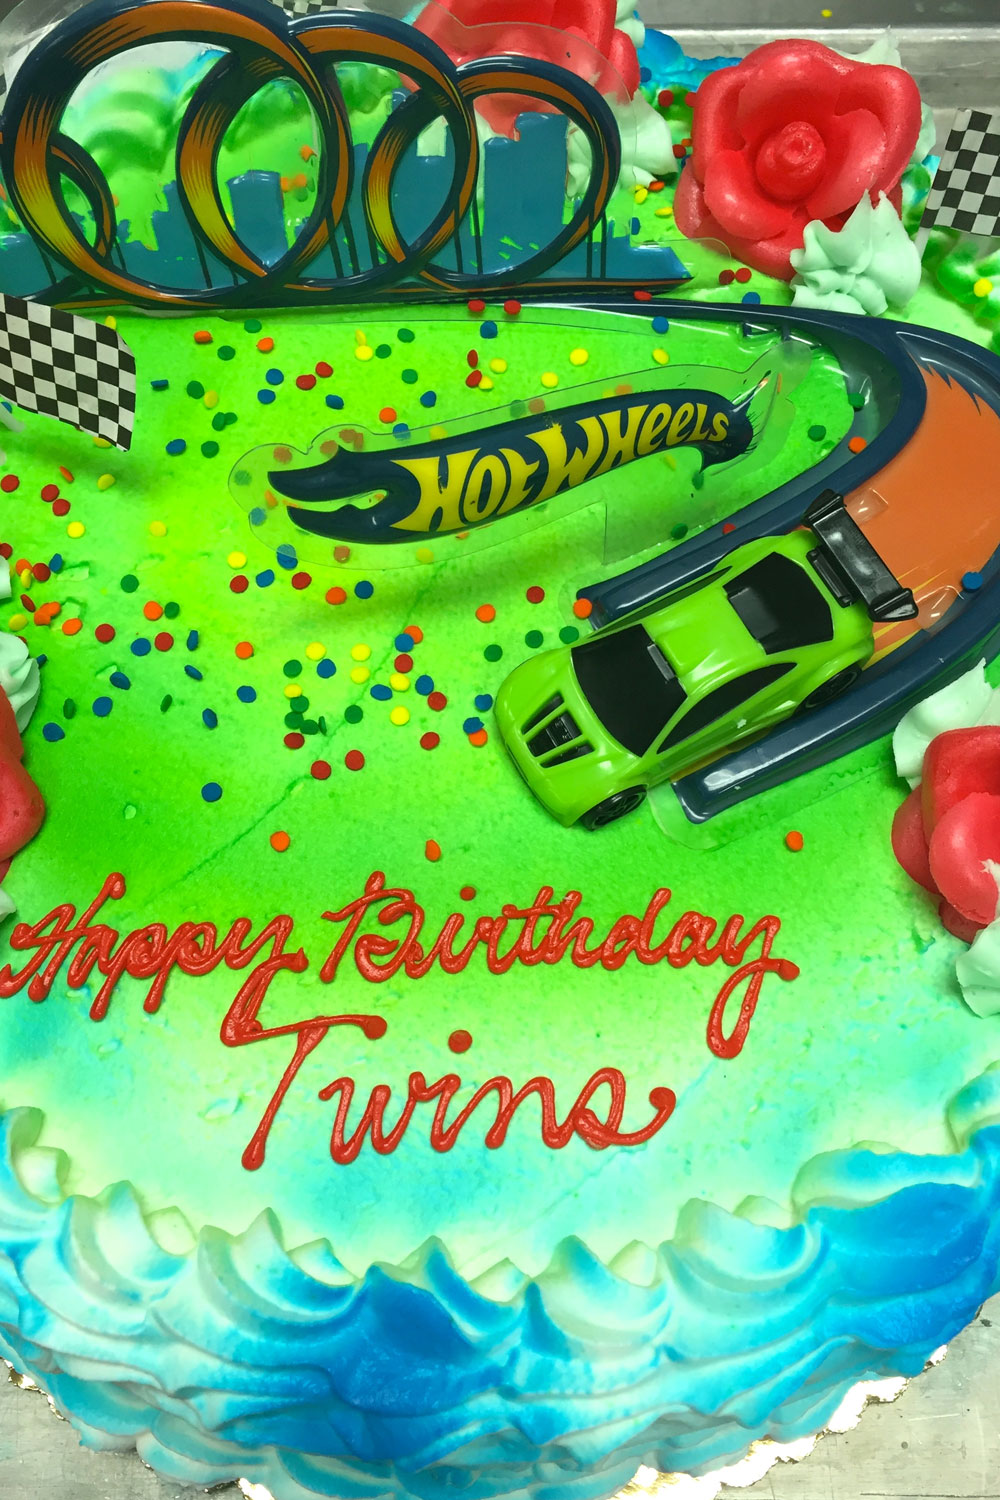 Hot Wheels birthday cake for twins